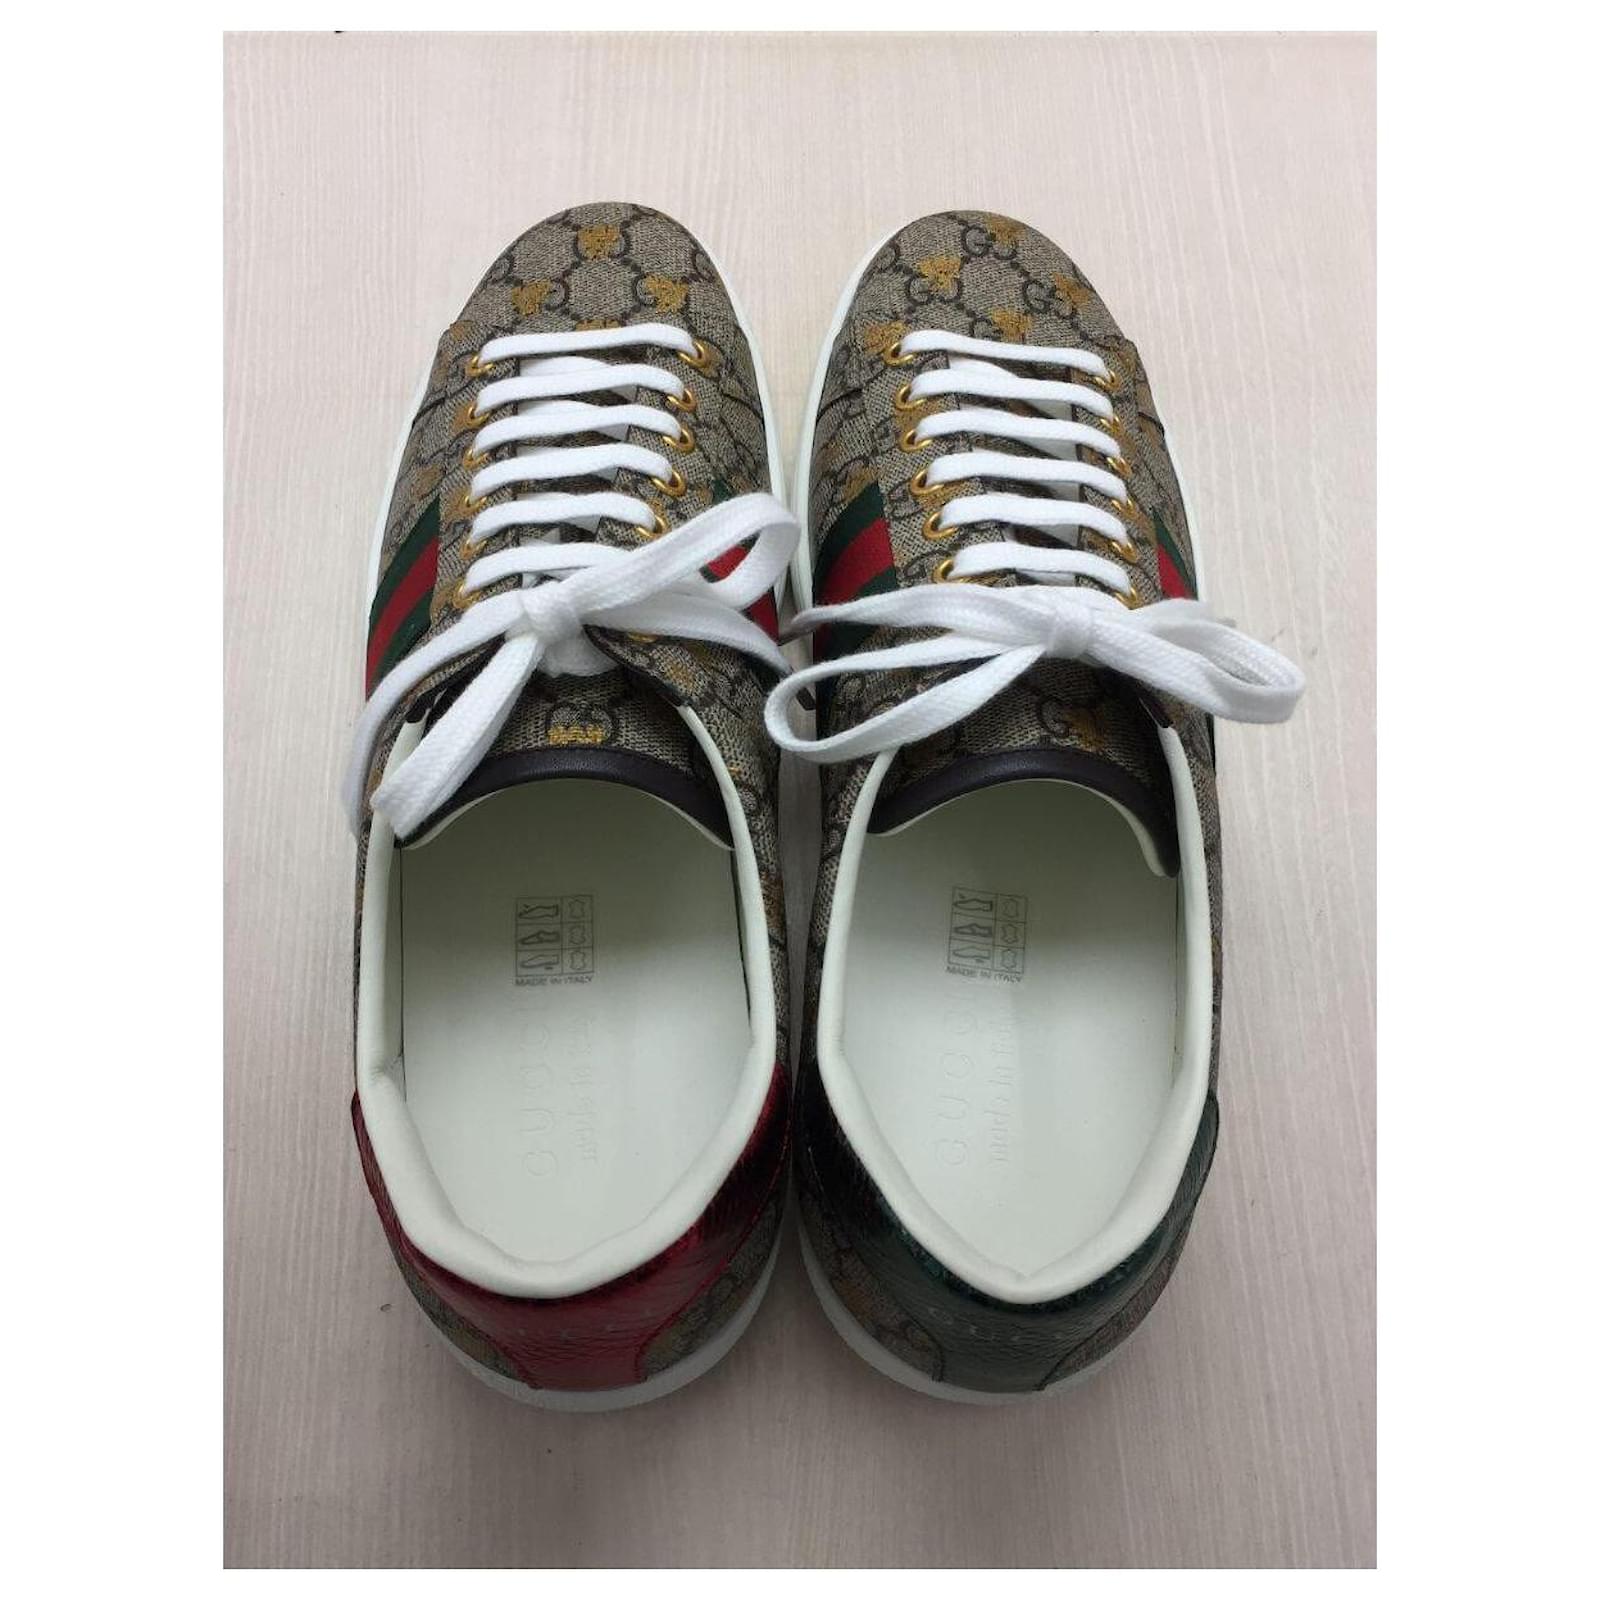 GUCCI GG Supreme with Ace Bee / Low-cut sneakers / UK10 / 548950